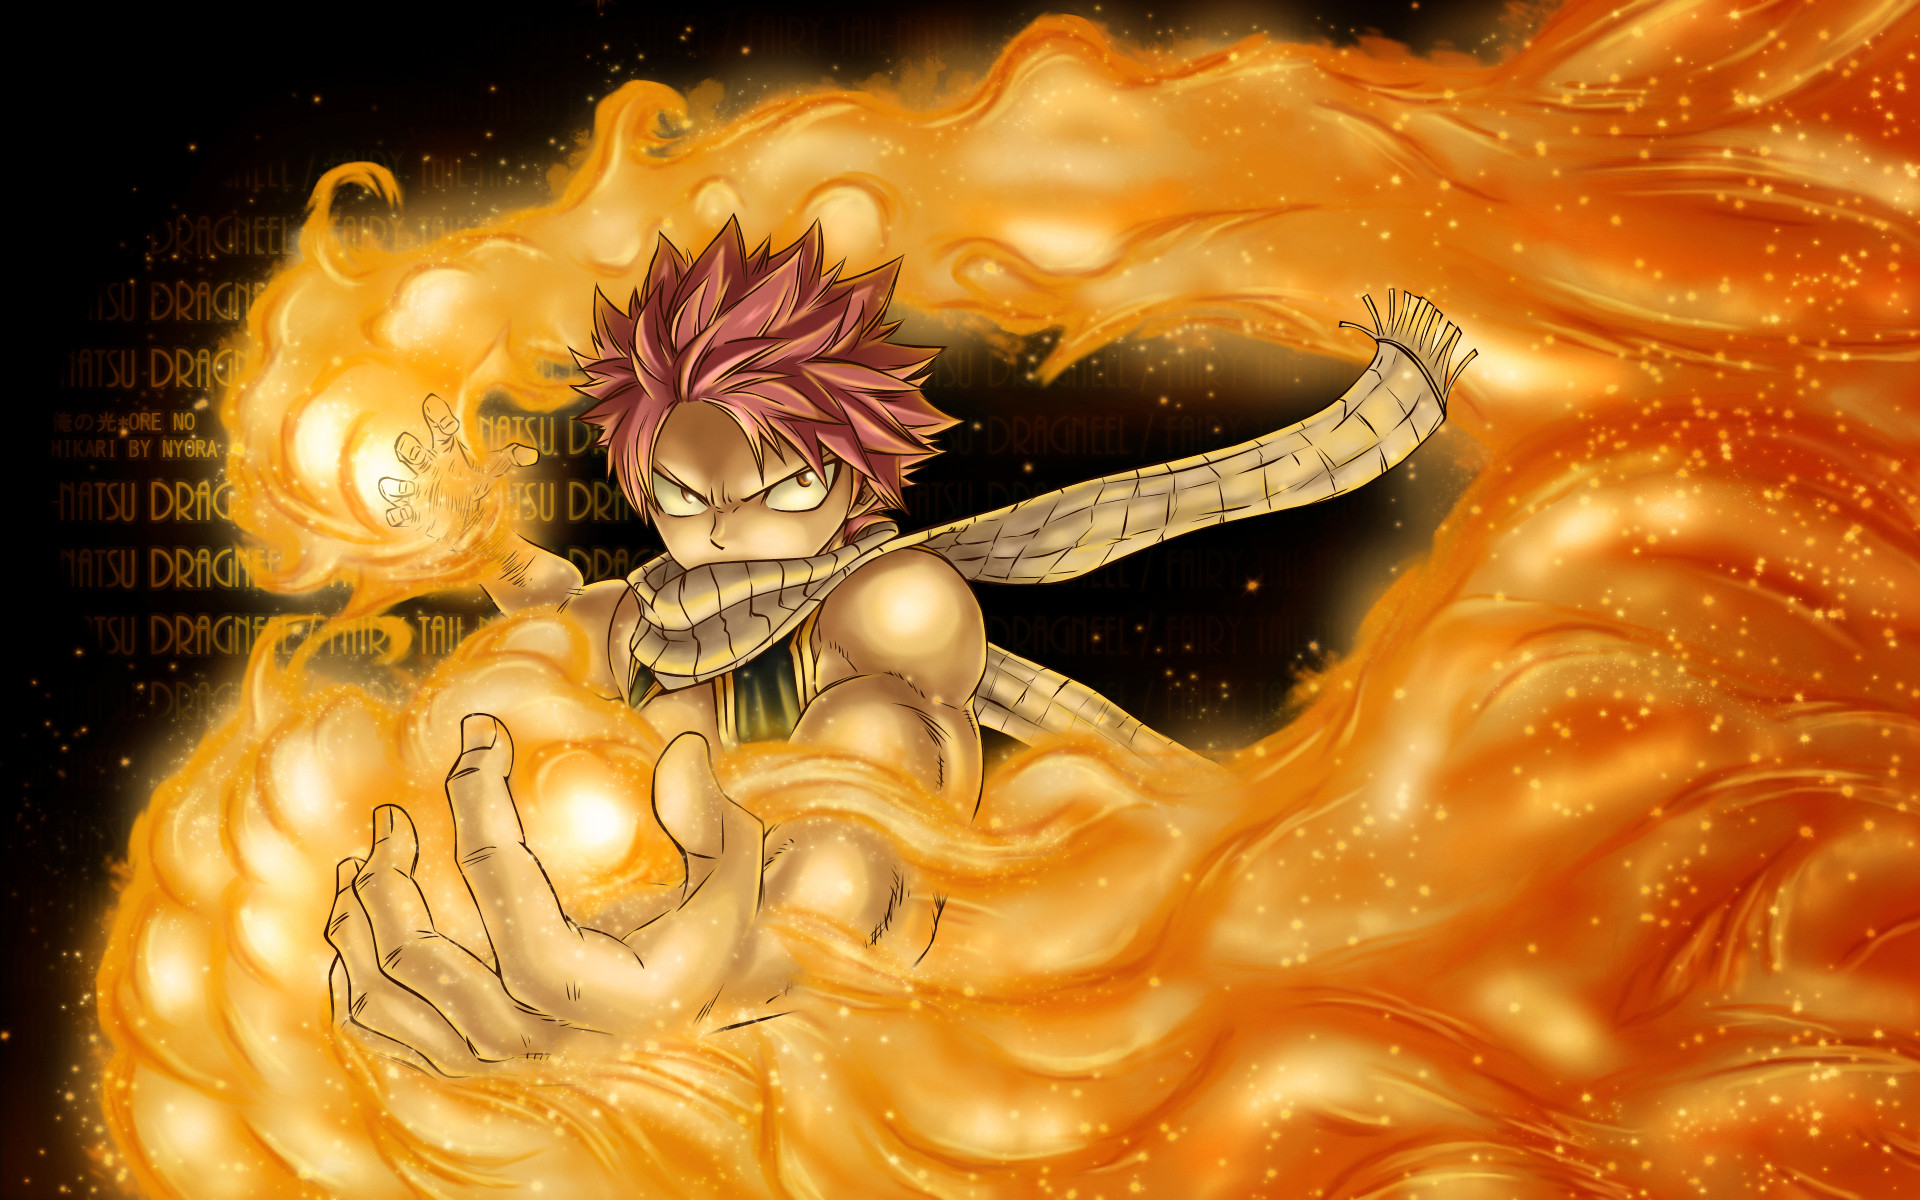 1920x1200 natsu dragneel fire flame fairy tail anime hd wallpaper image picture .